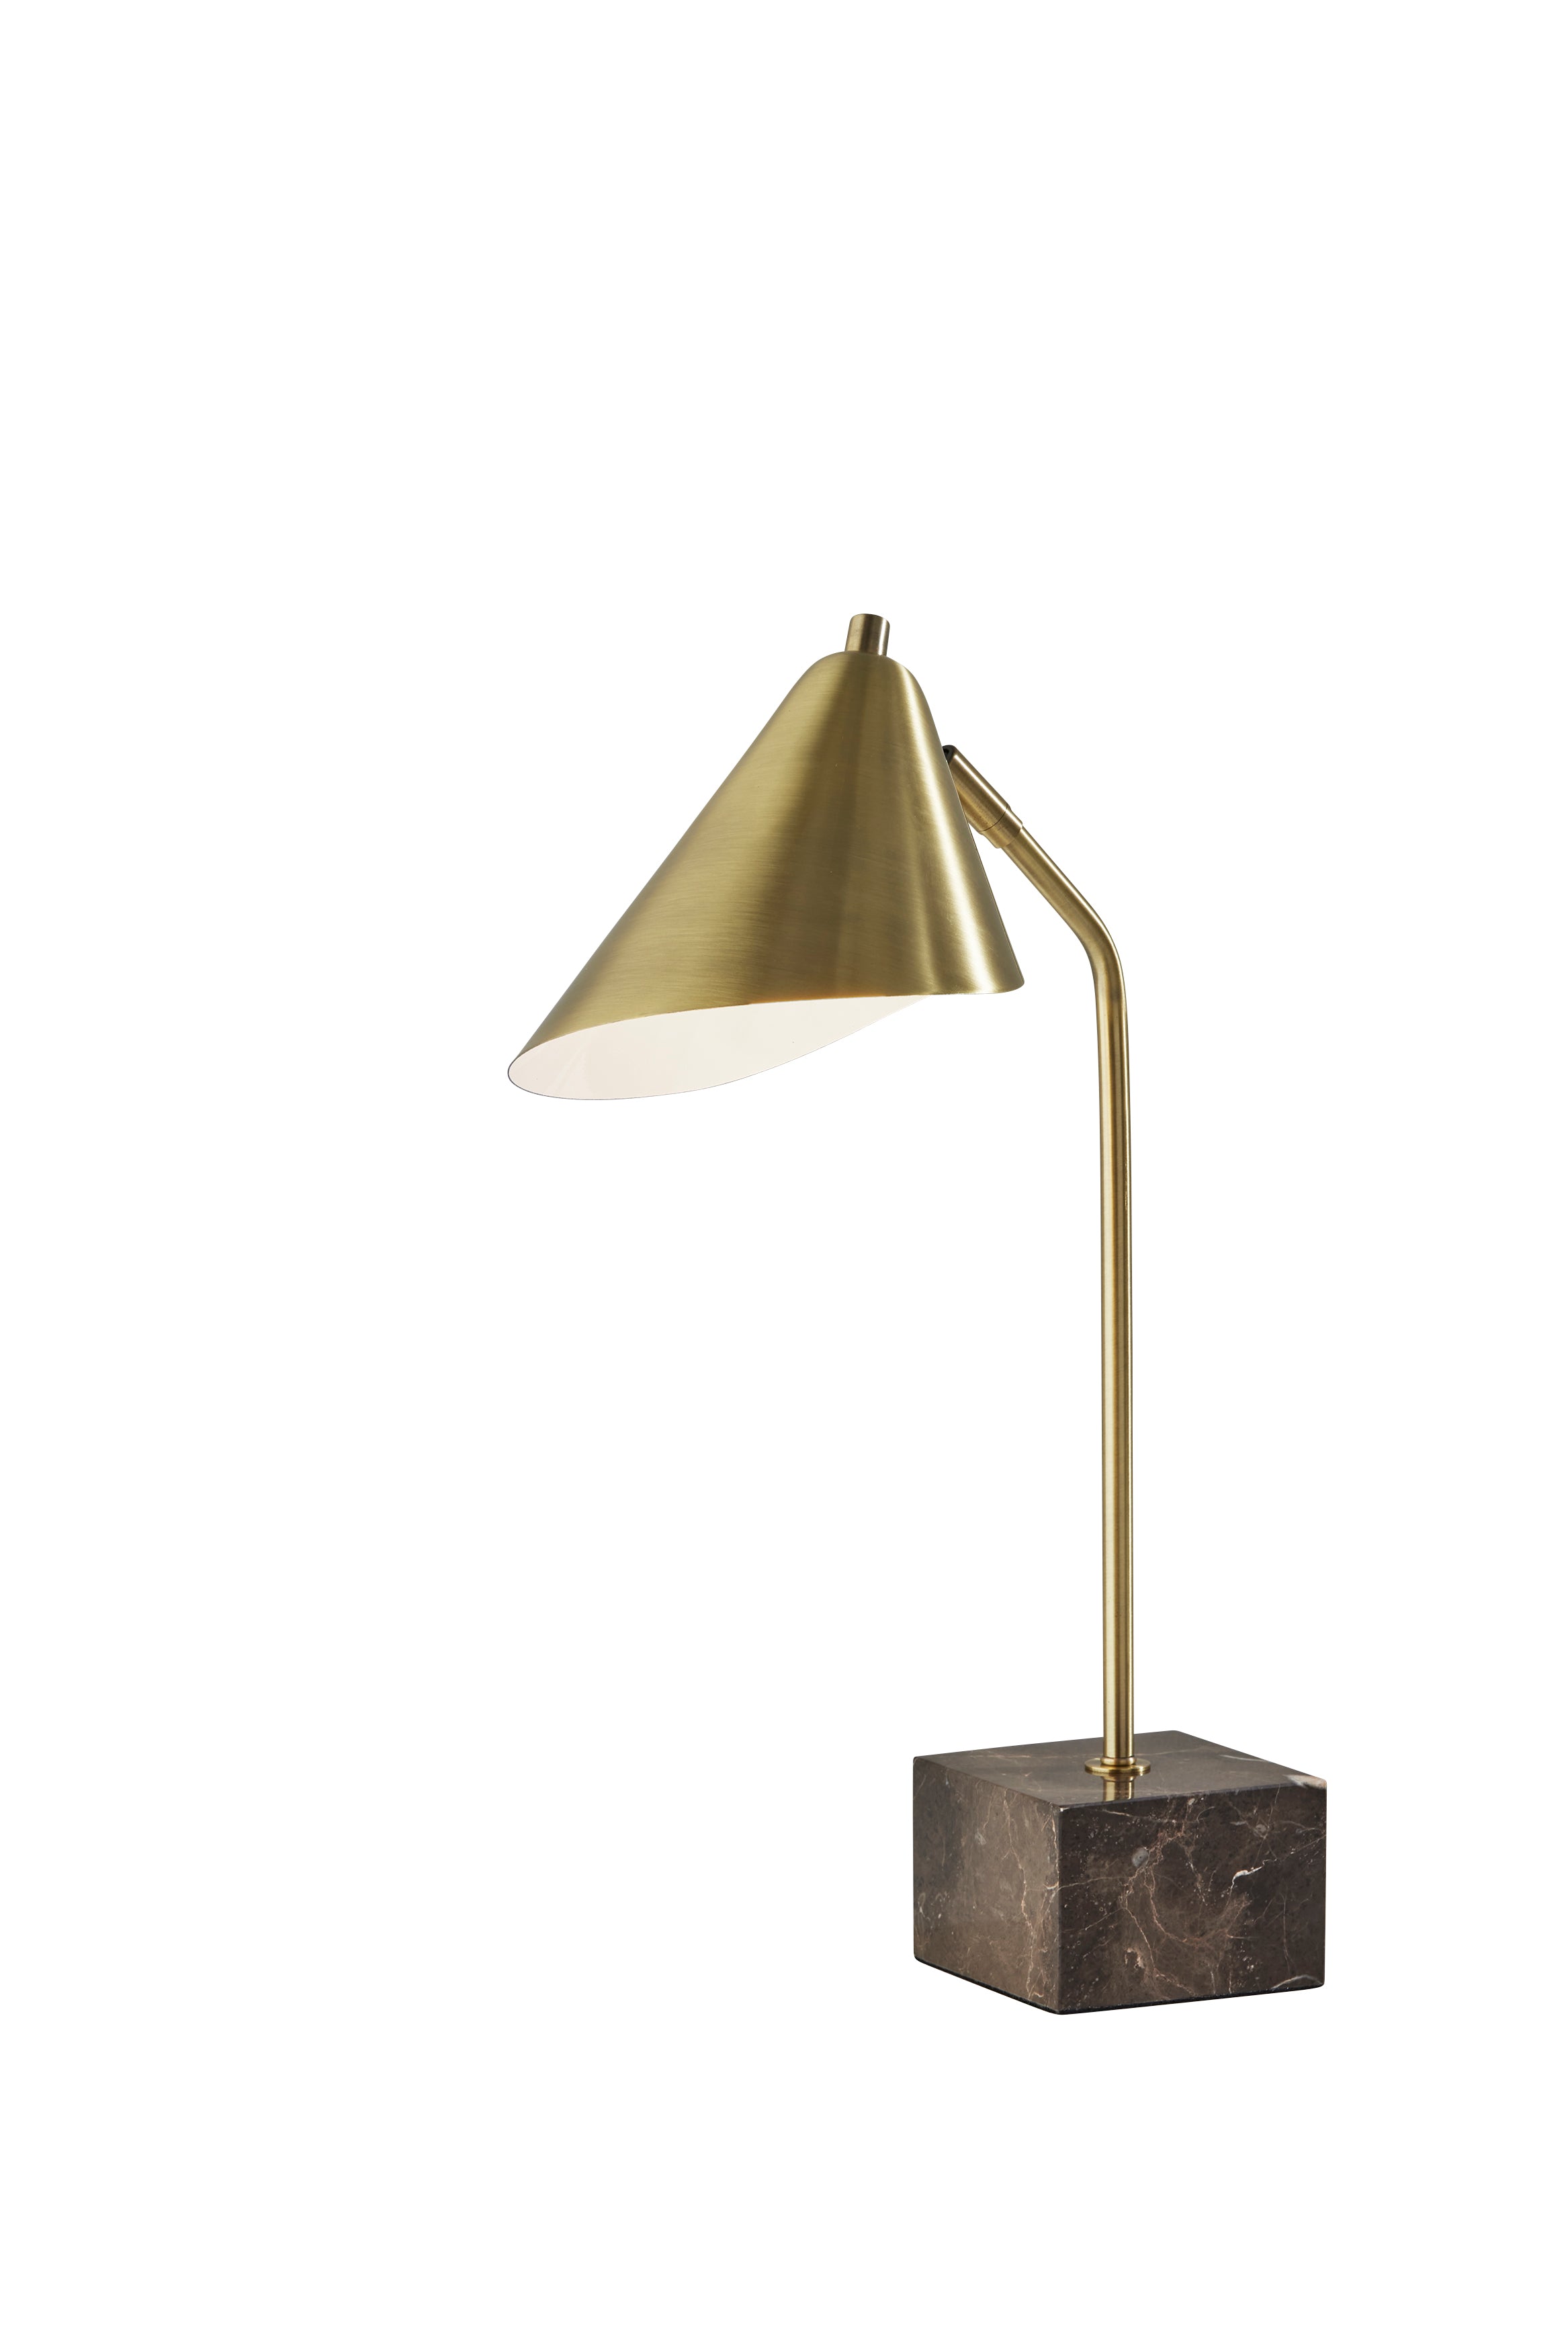 HAWTHORNE Table lamp Gold - 4246-21 | ADESSO